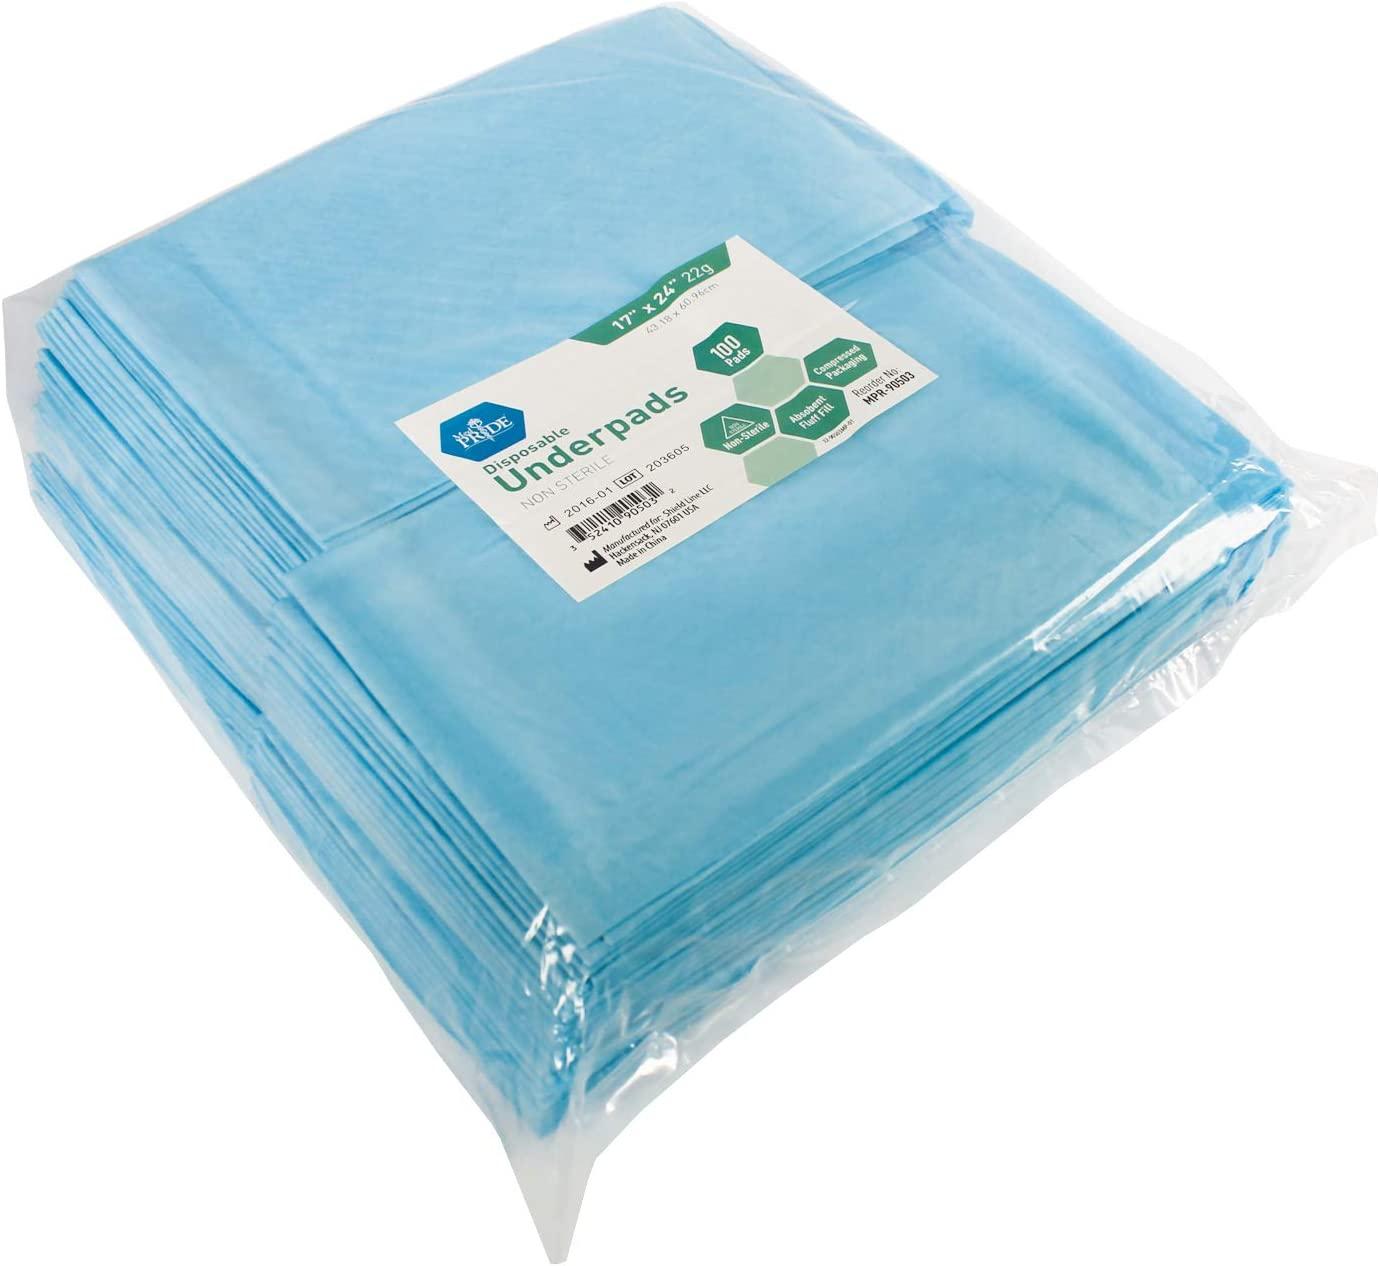 Dry Direct Ultimate Booster Pad MINI-CASE of 100